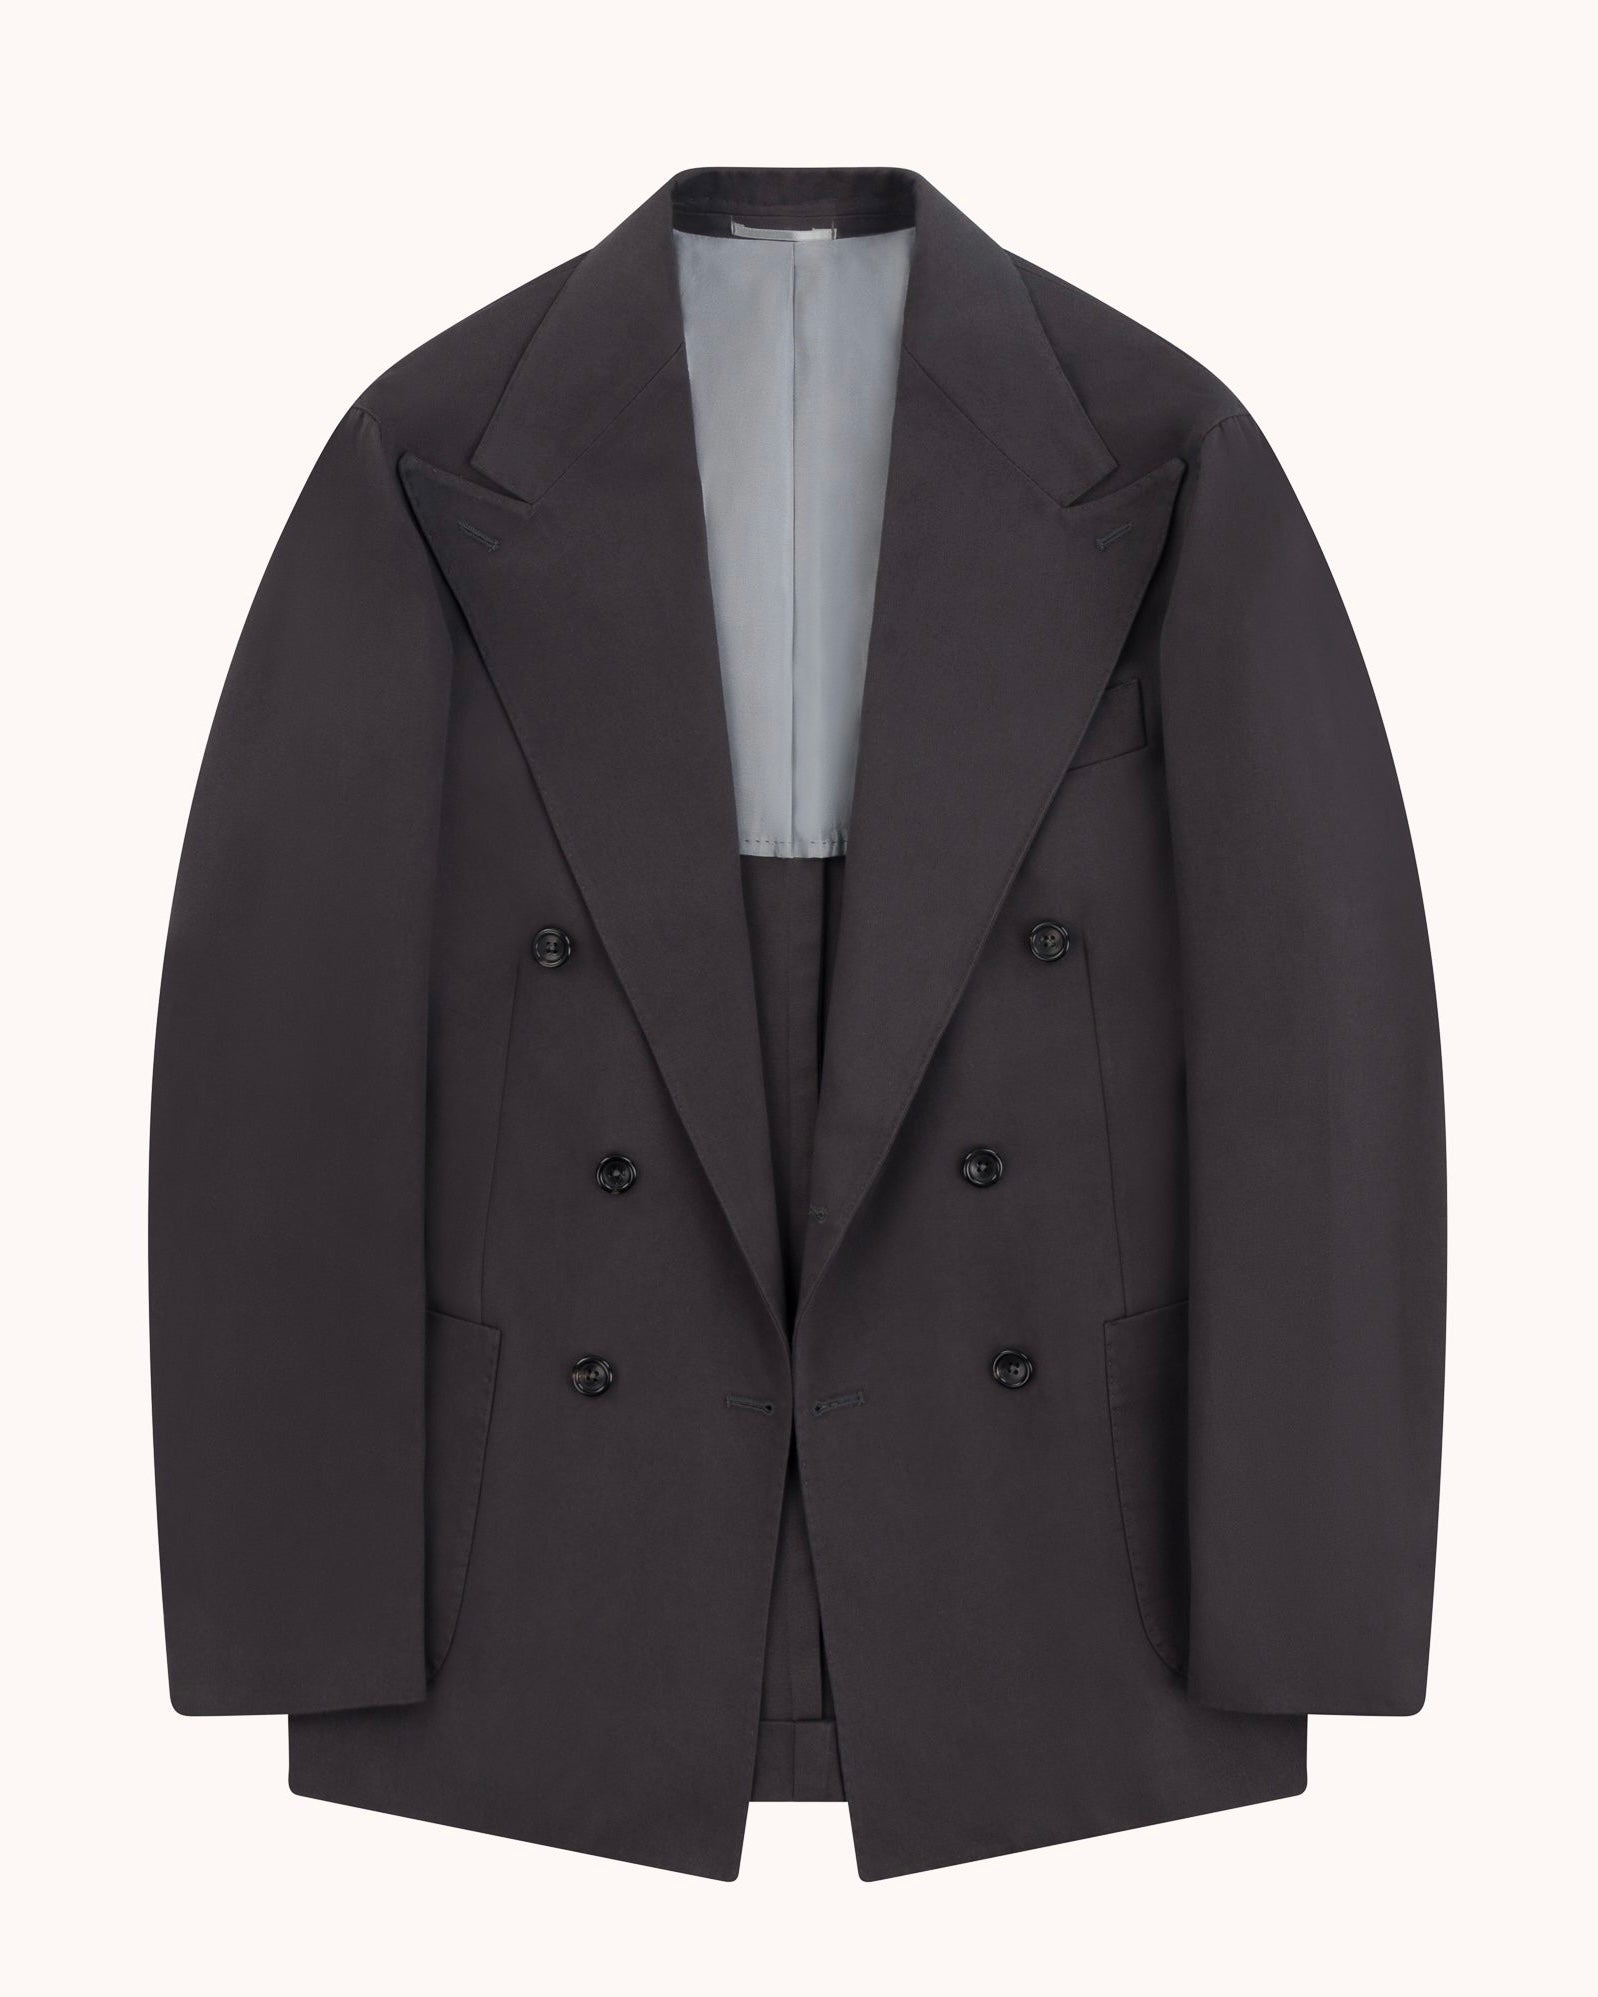 Double Breasted Sport Jacket - Charcoal Brushed Cotton